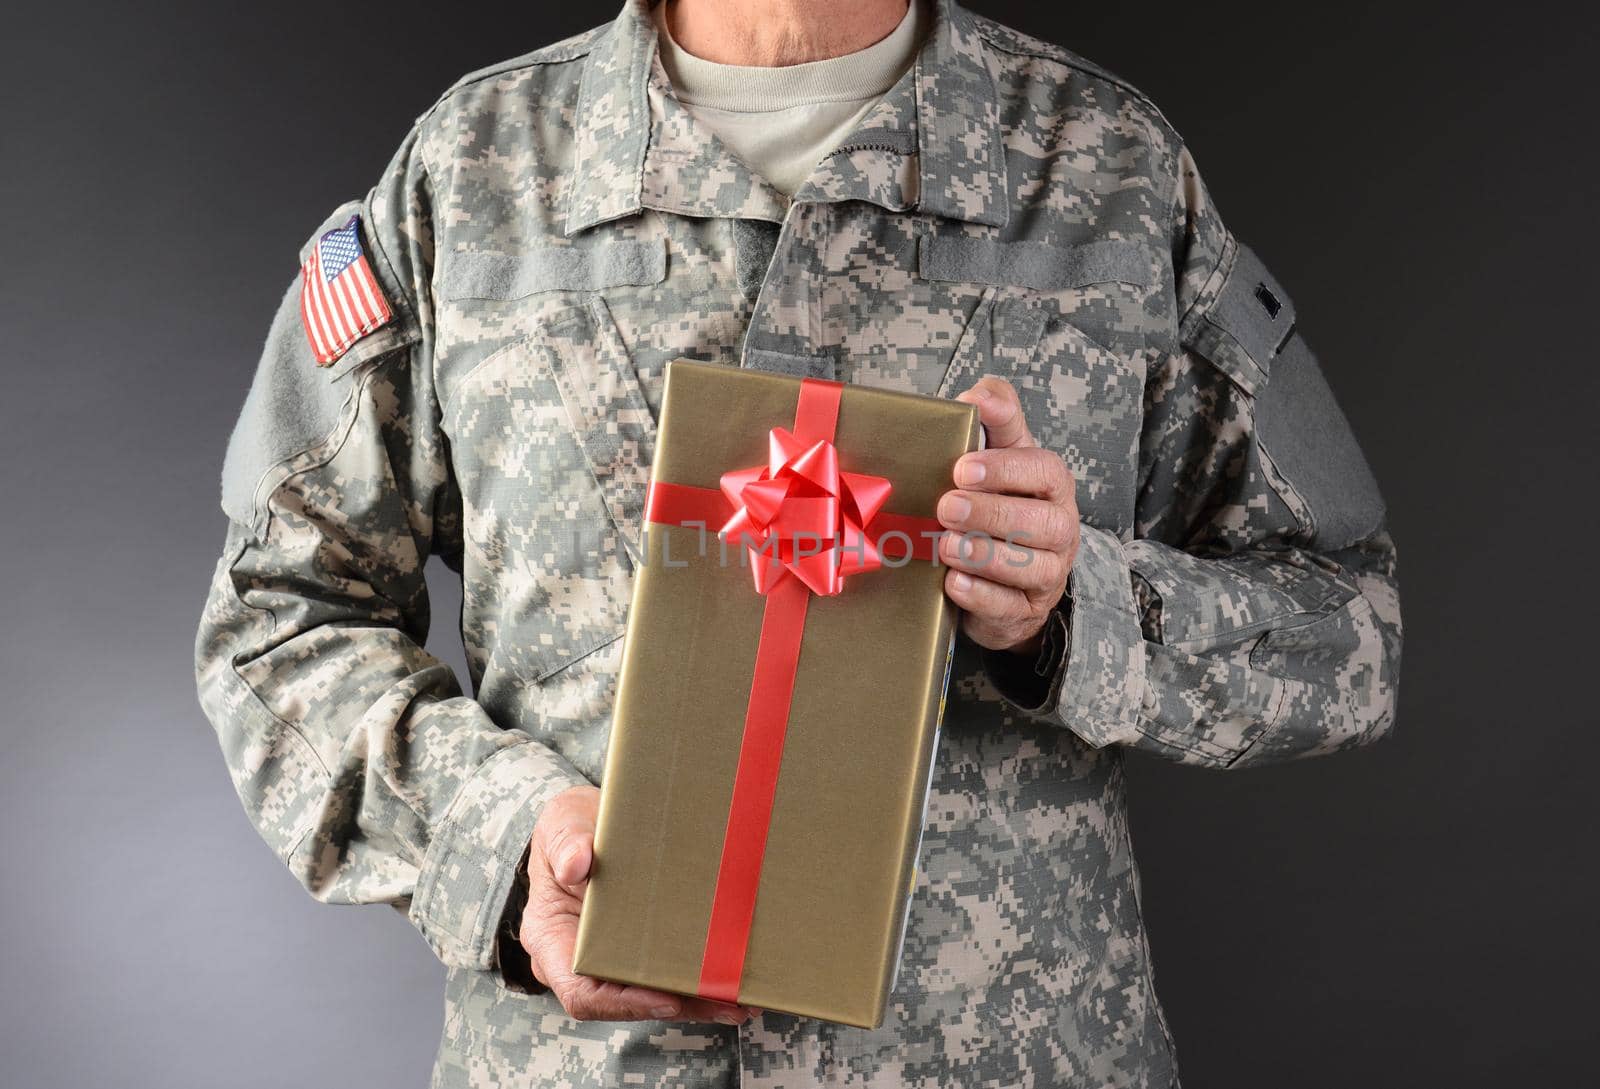 Closeup of a soldier holding a Christmas present. The gift is wrapped in gold paper with red ribbon and bow. Horizontal format. Man is unrecognizable.